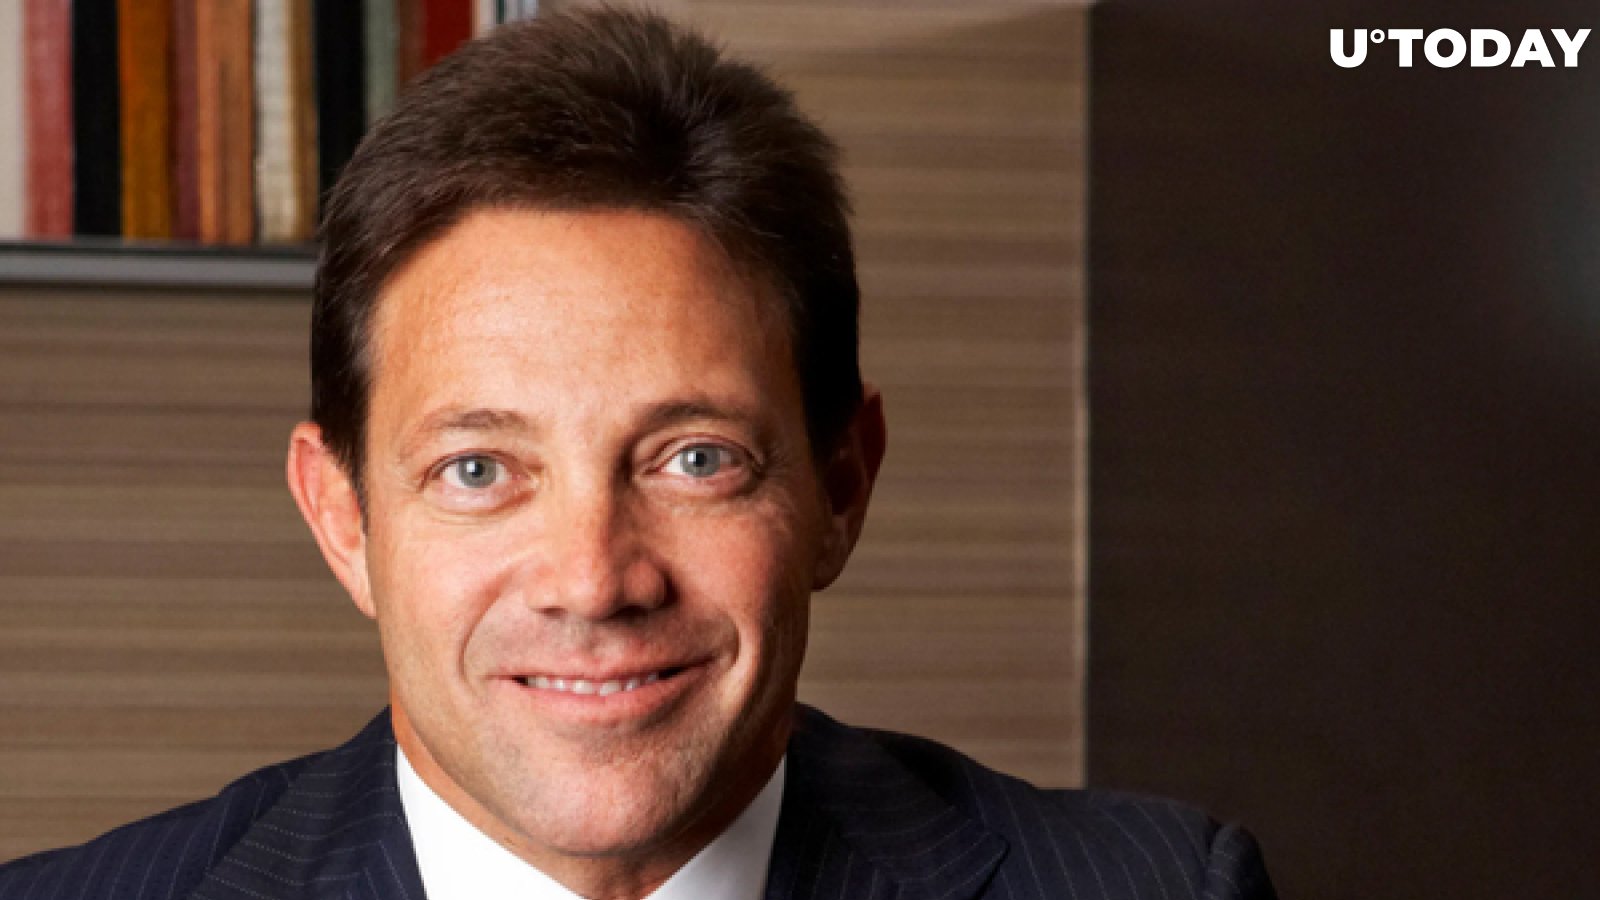 “The Wolf Of Wall Street” Jordan Belfort Changes His Stance on Bitcoin, Expects $100,000 per BTC